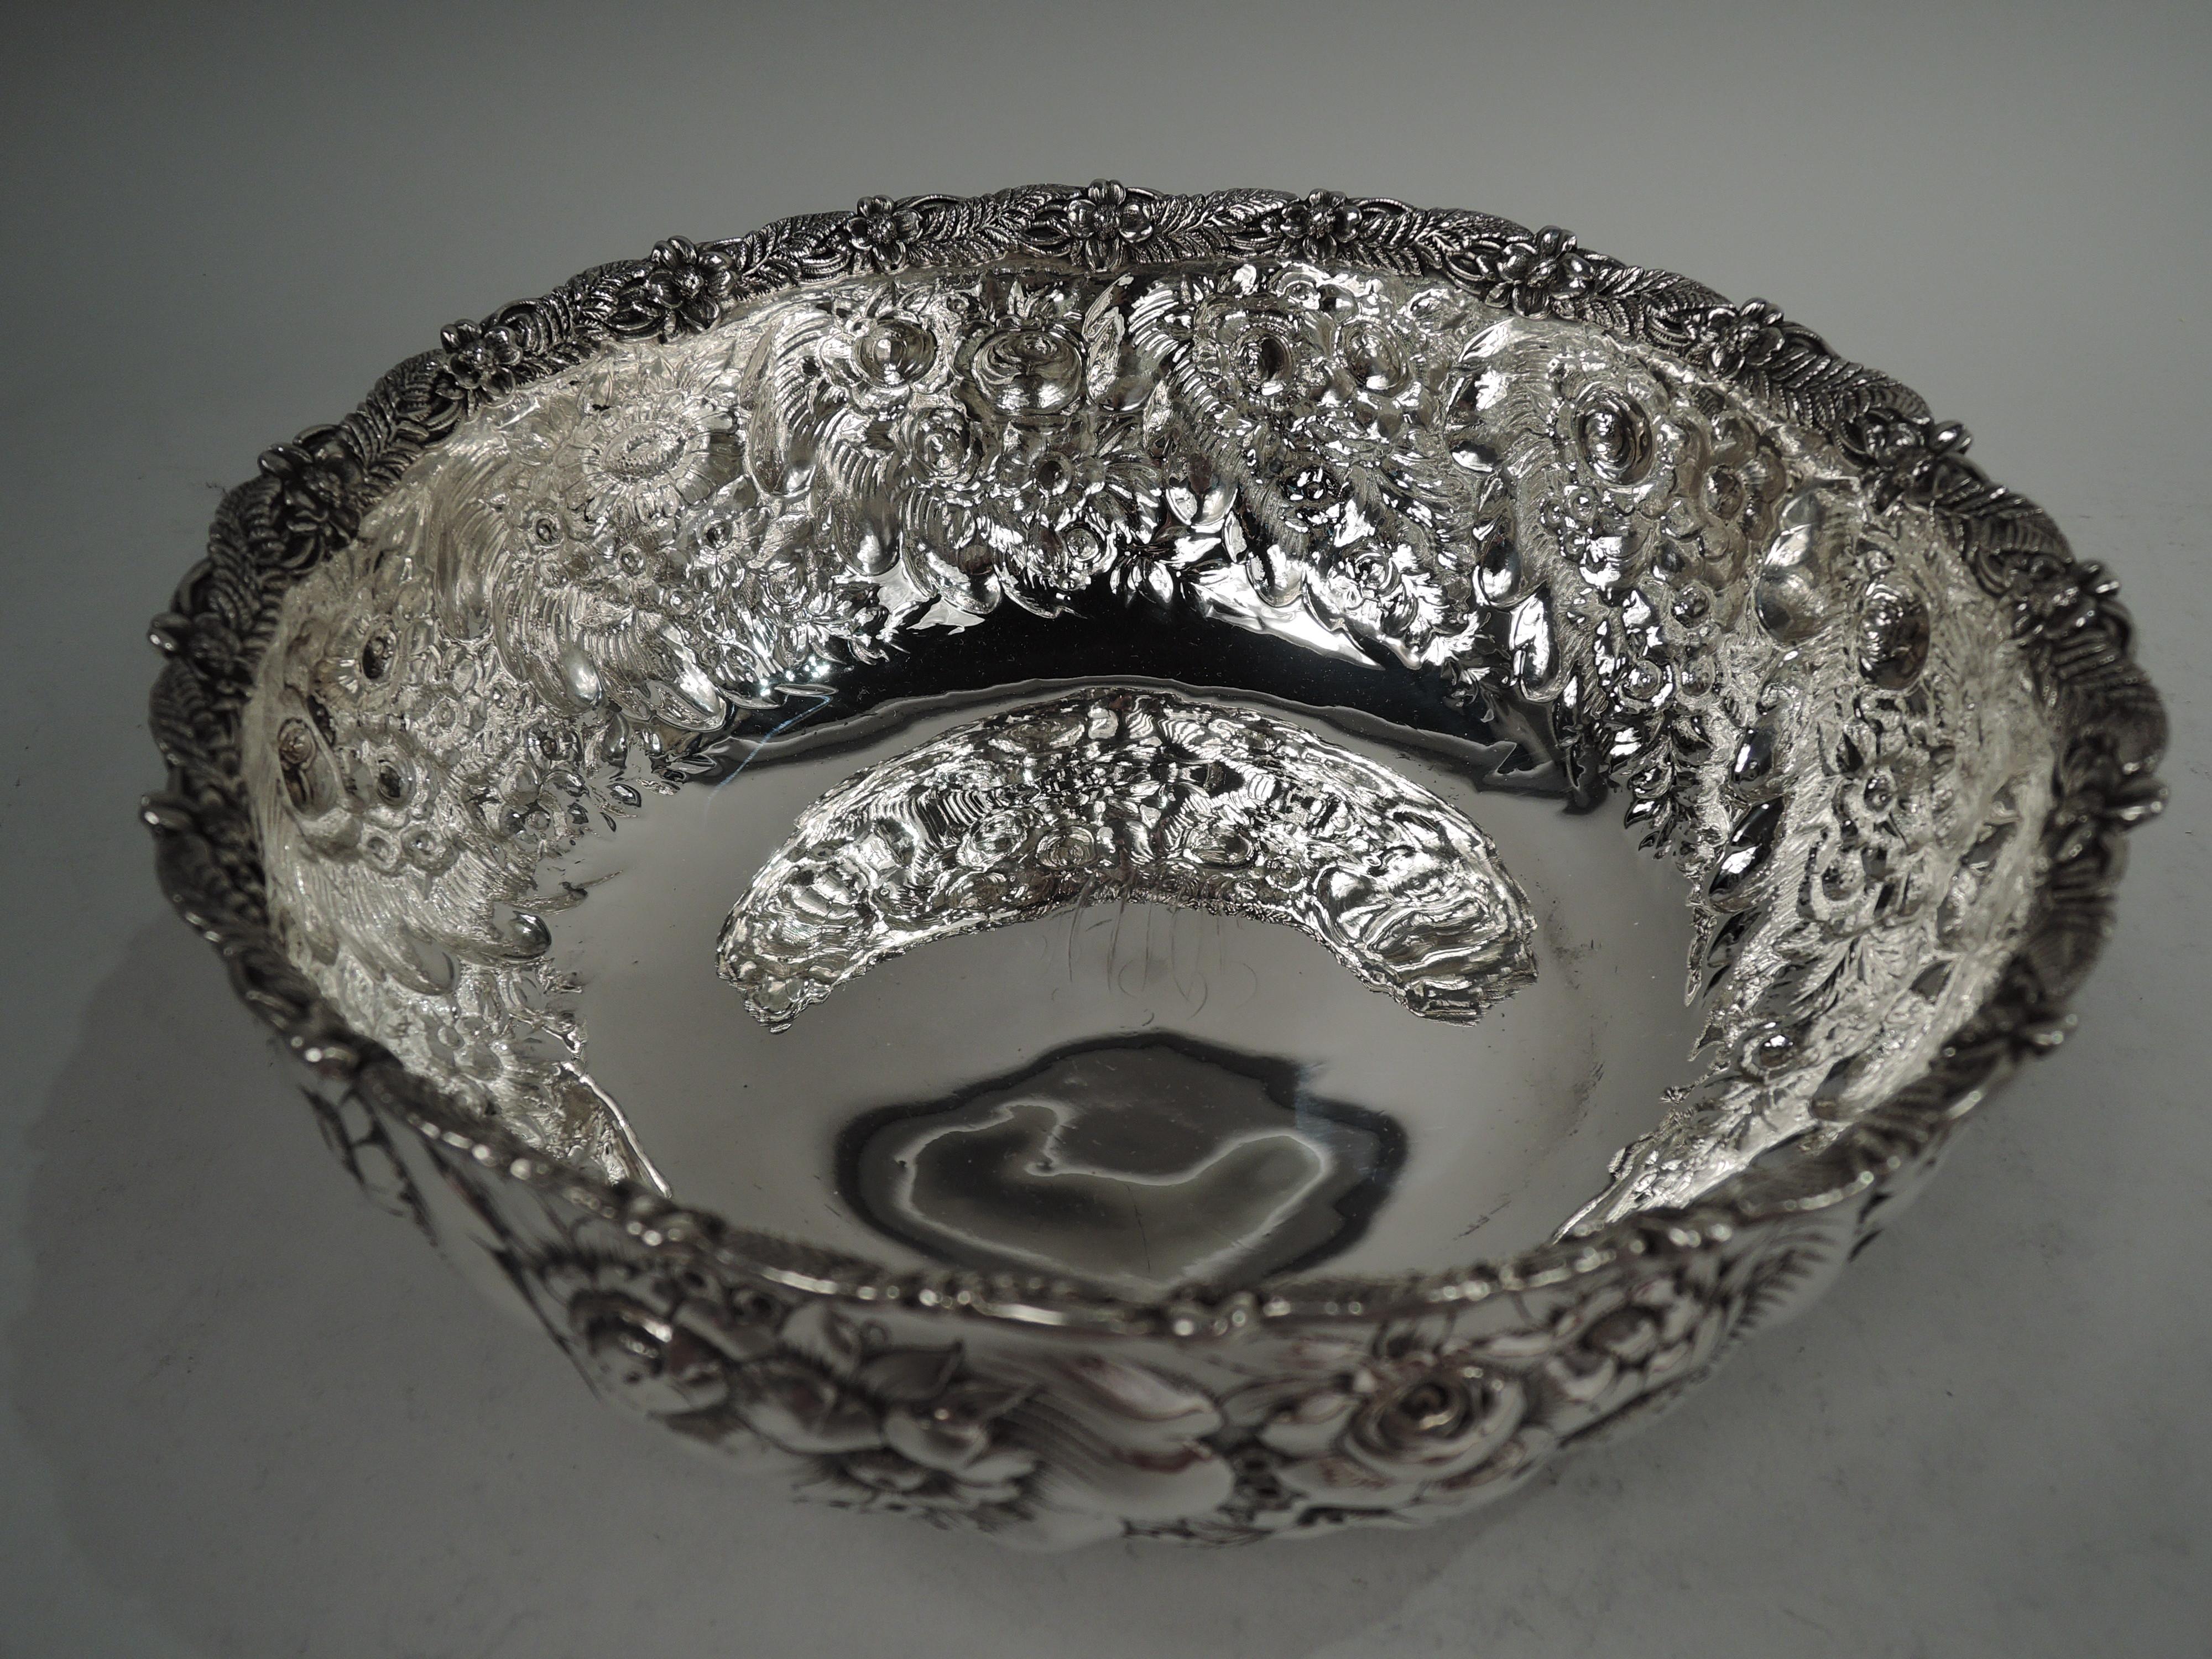 Victorian sterling silver bowl. Made by Tiffany & Co. in New York. Curved sides with repousse fern and flower pattern. Cast interior rim comprising alternating ferns and flower heads. Four leafing scroll-mounted paw supports. Fully marked including